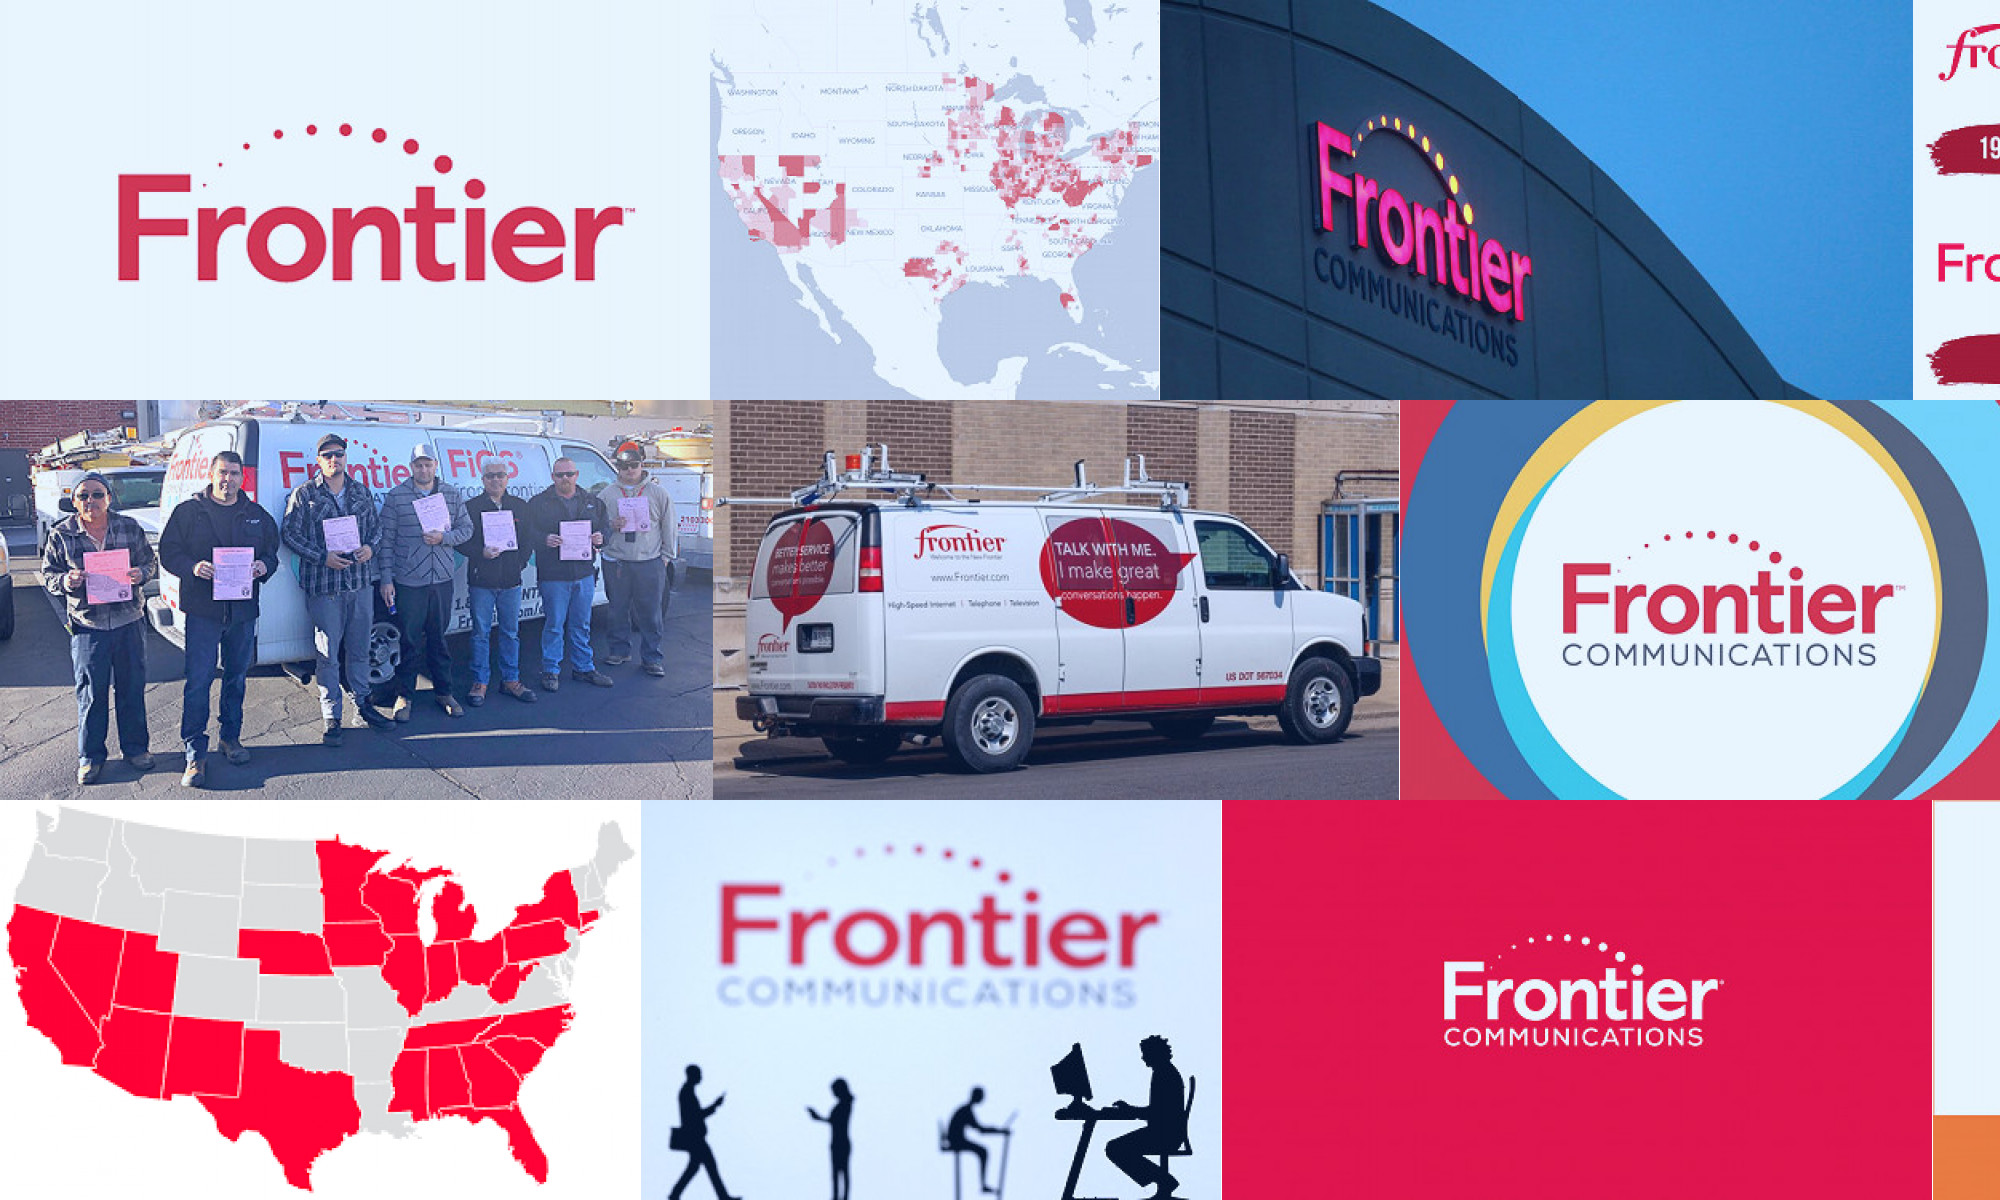 frontier communications